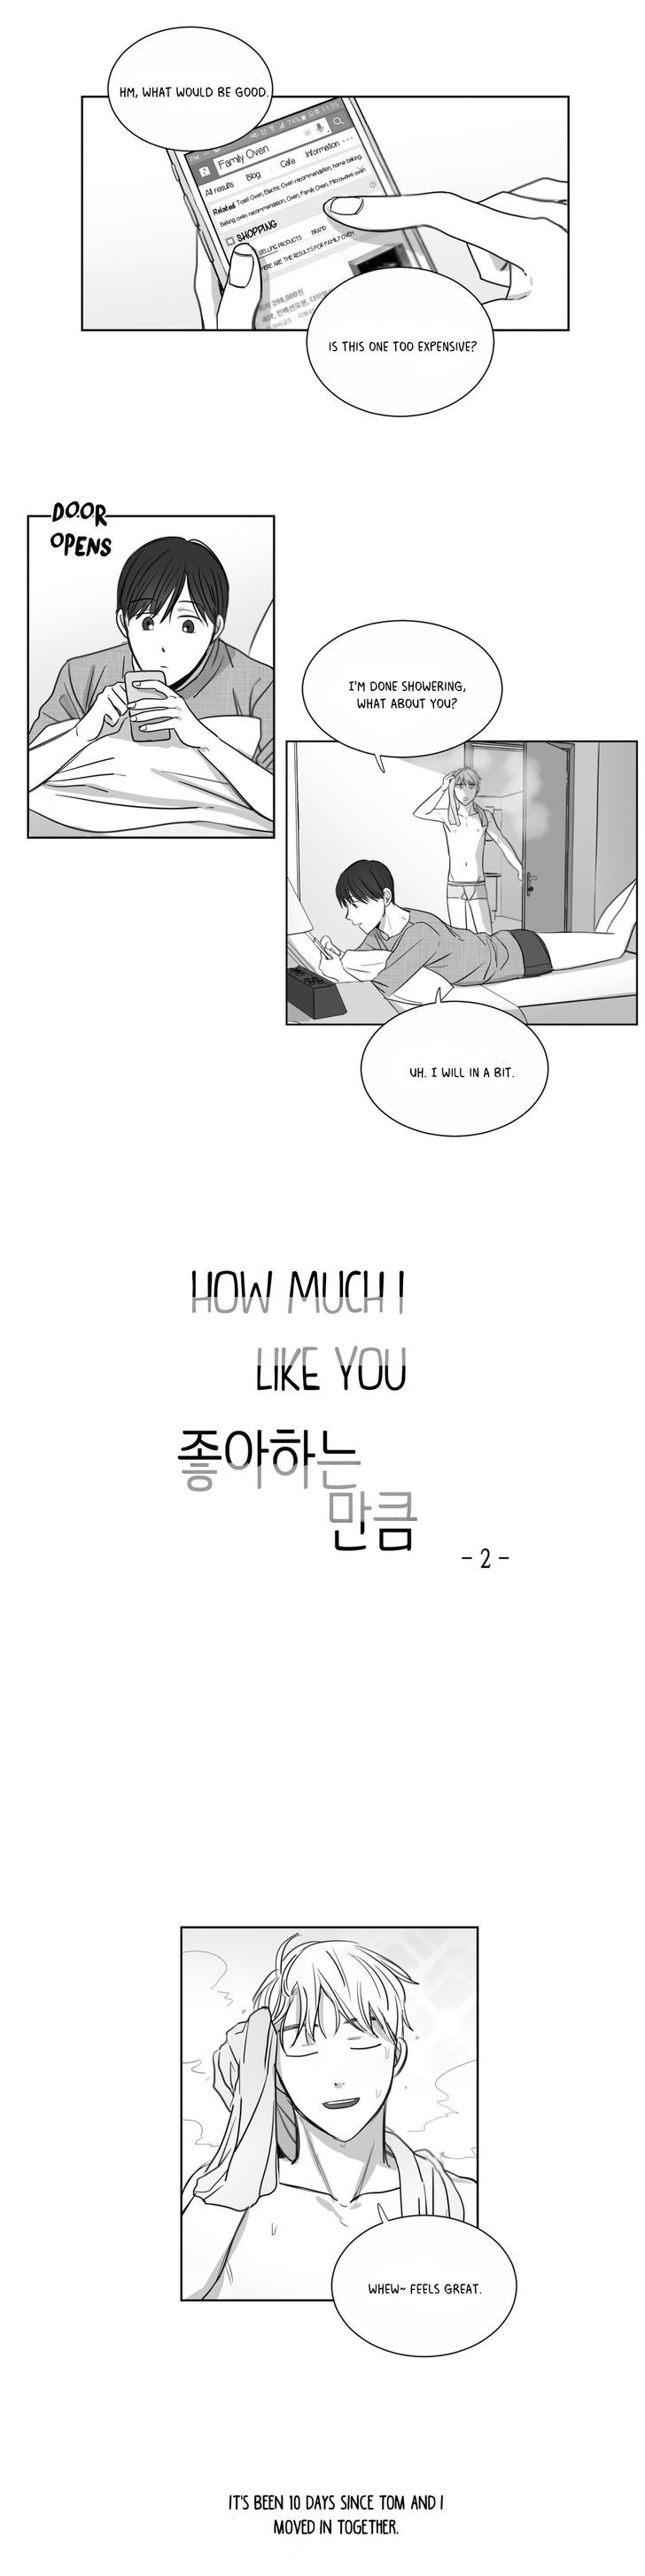 How Much I Like You - Page 2